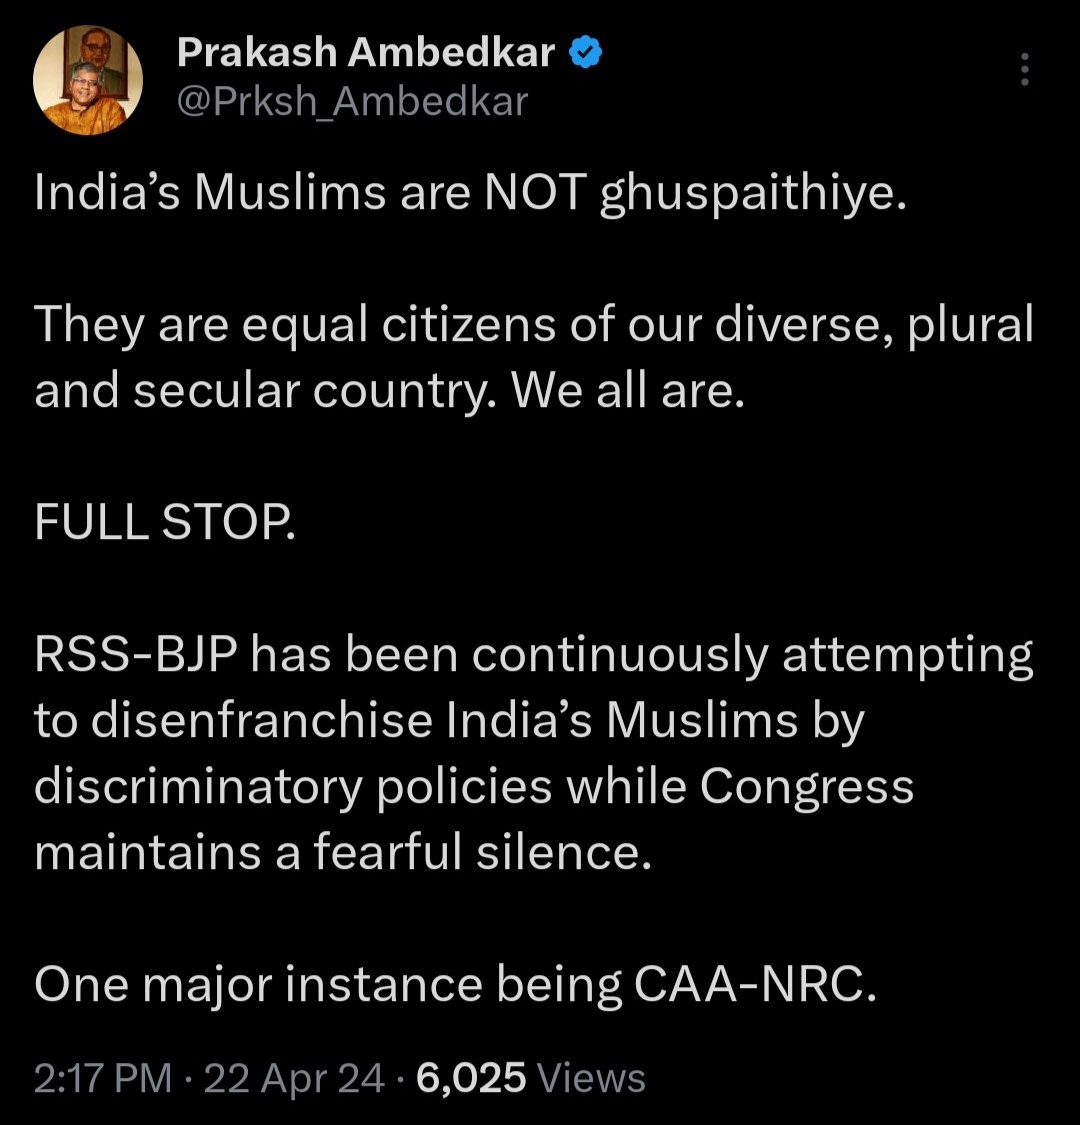 This is why I am supporting this man,
Unlike Congress, Prakash Ambedkar is the leader who openly criticized and opposed Modi's dangerous hate speech against Indian Muslims, read his official statement,
  Other secular parties are not able to muster courage to oppose Modi's hate